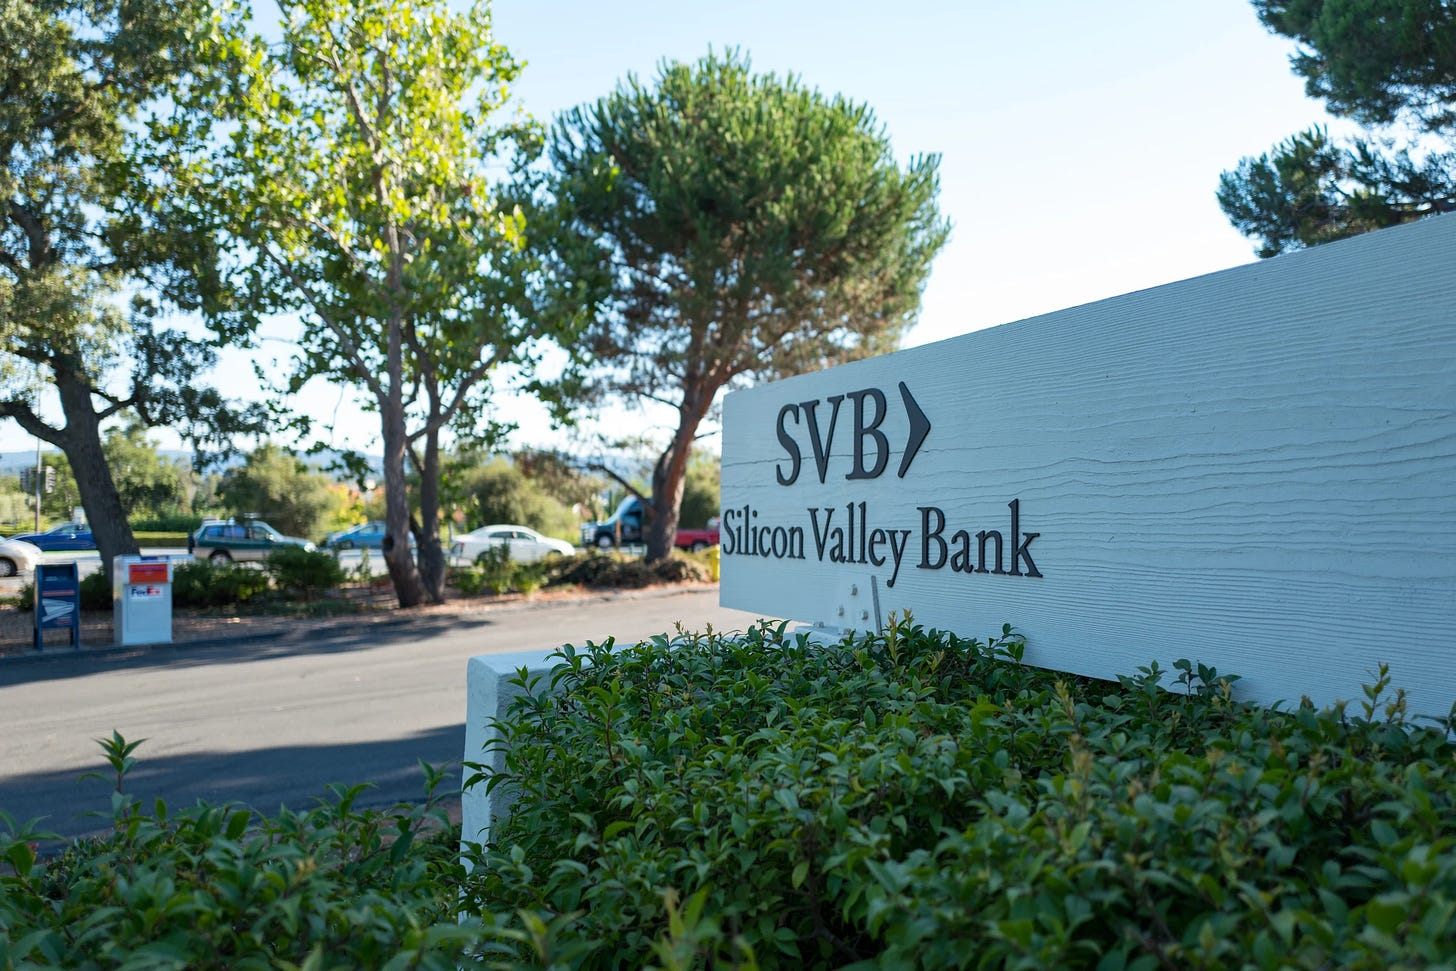 Signage for high-tech commercial bank Silicon Valley Bank, on Sand Hill Road in the Silicon Valley town of Menlo Park, California, August 25, 2016. (Photo via Smith Collection/Gado/Getty Images).